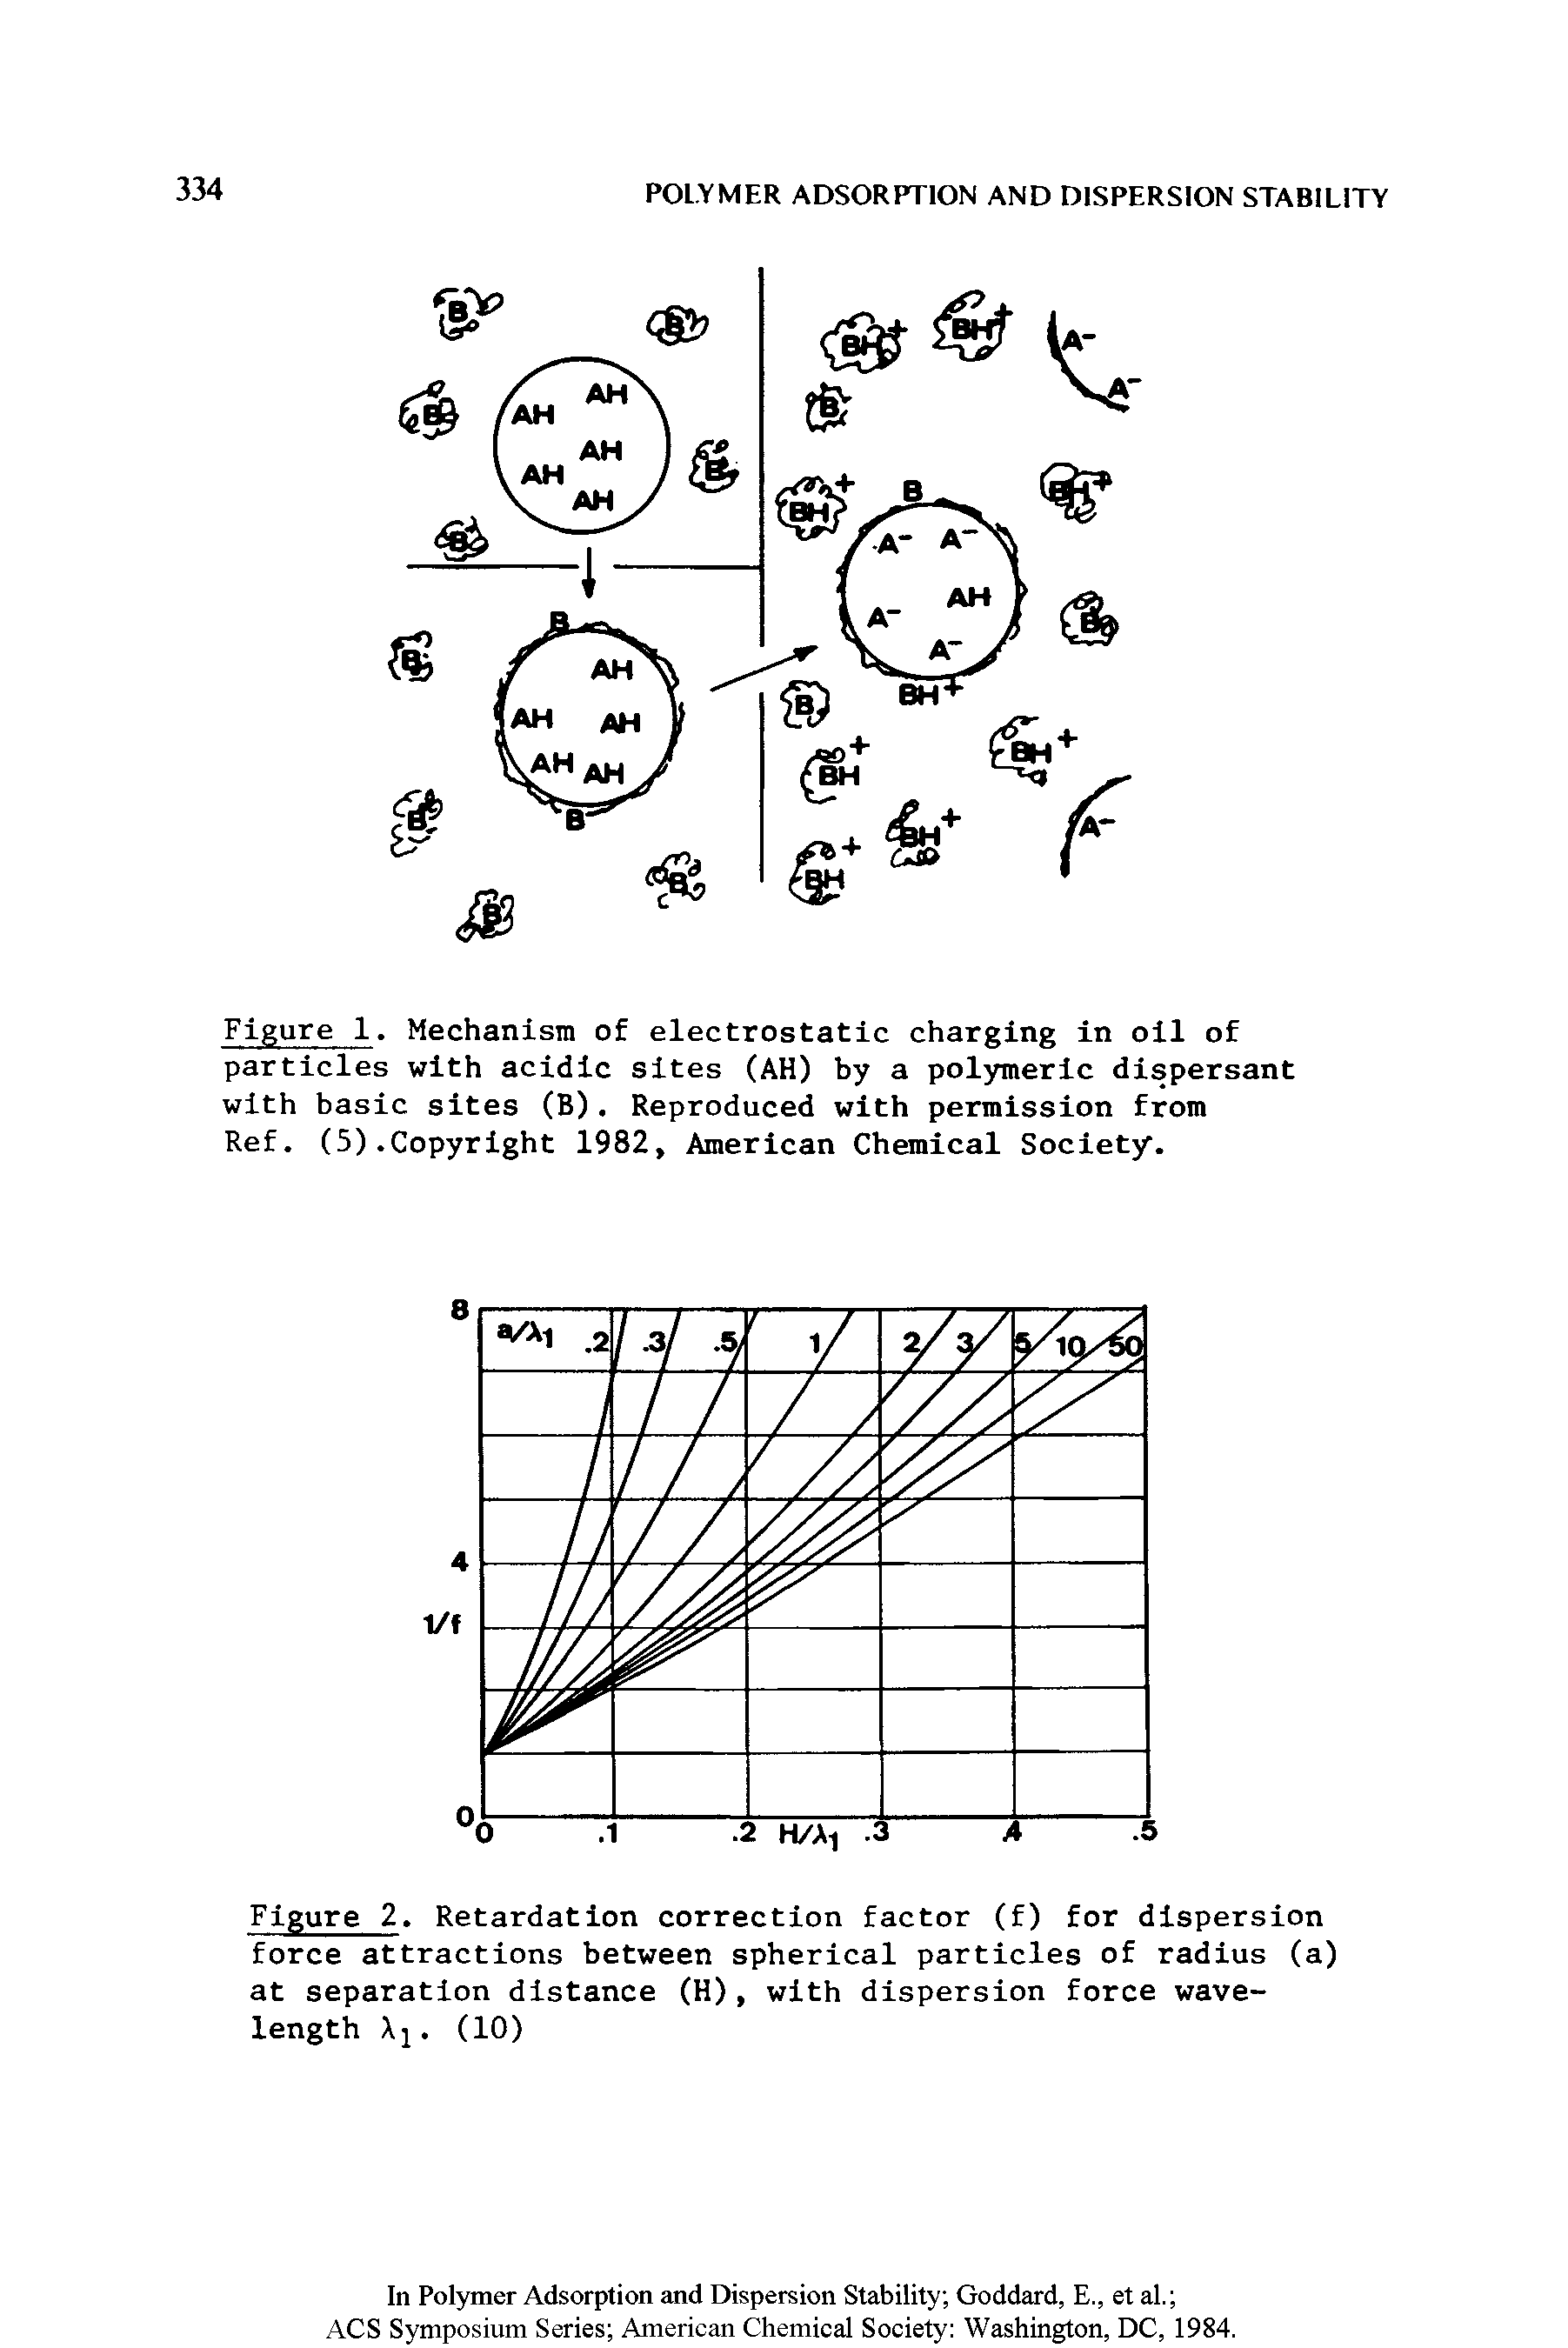 Figure 1. Mechanism of electrostatic charging in oil of particles with acidic sites (AH) by a polymeric dispersant with basic sites (B). Reproduced with permission from Ref. (5).Copyright 1982, American Chemical Society.